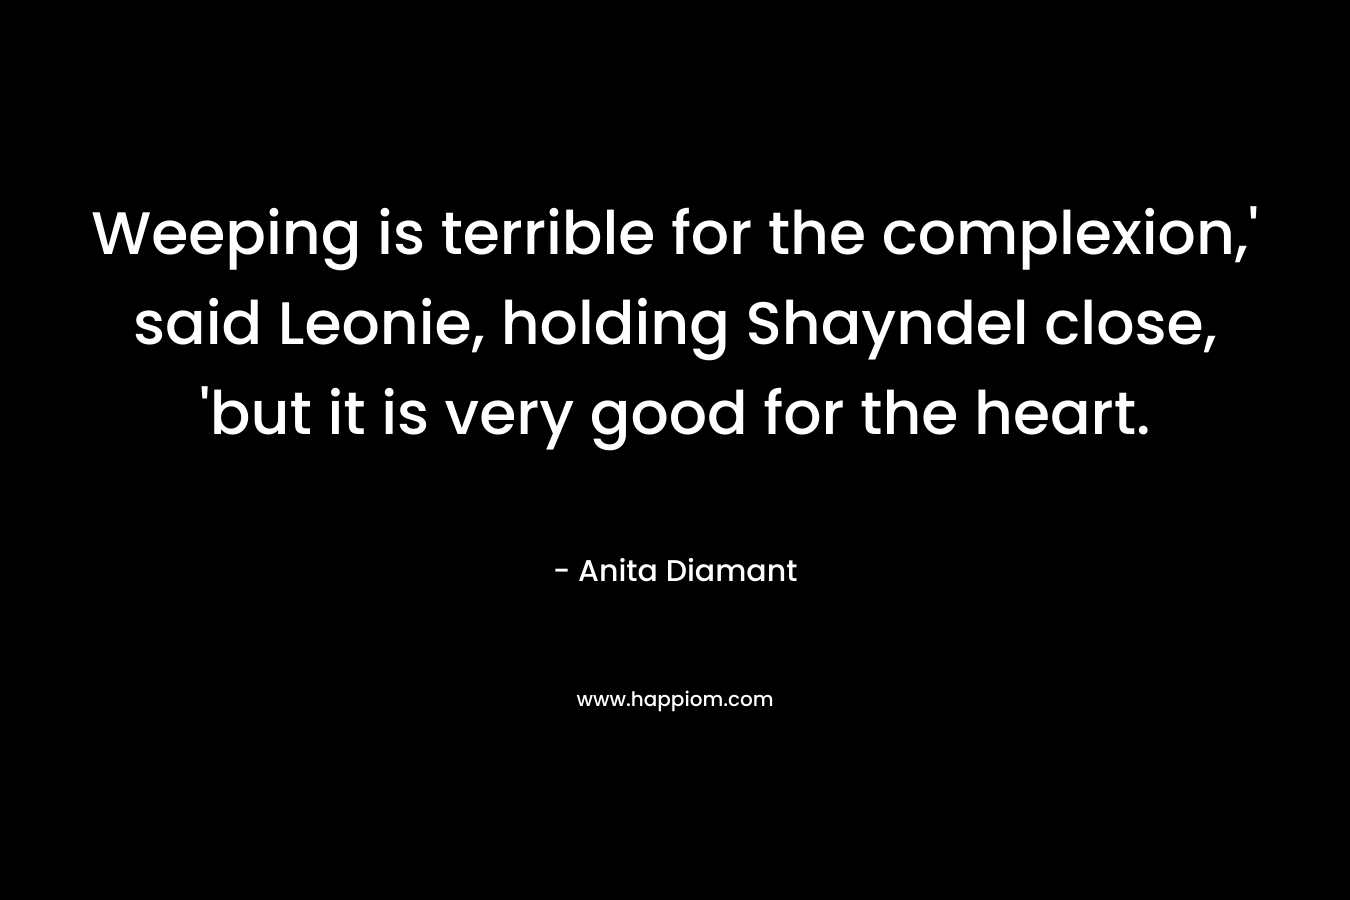 Weeping is terrible for the complexion,' said Leonie, holding Shayndel close, 'but it is very good for the heart.